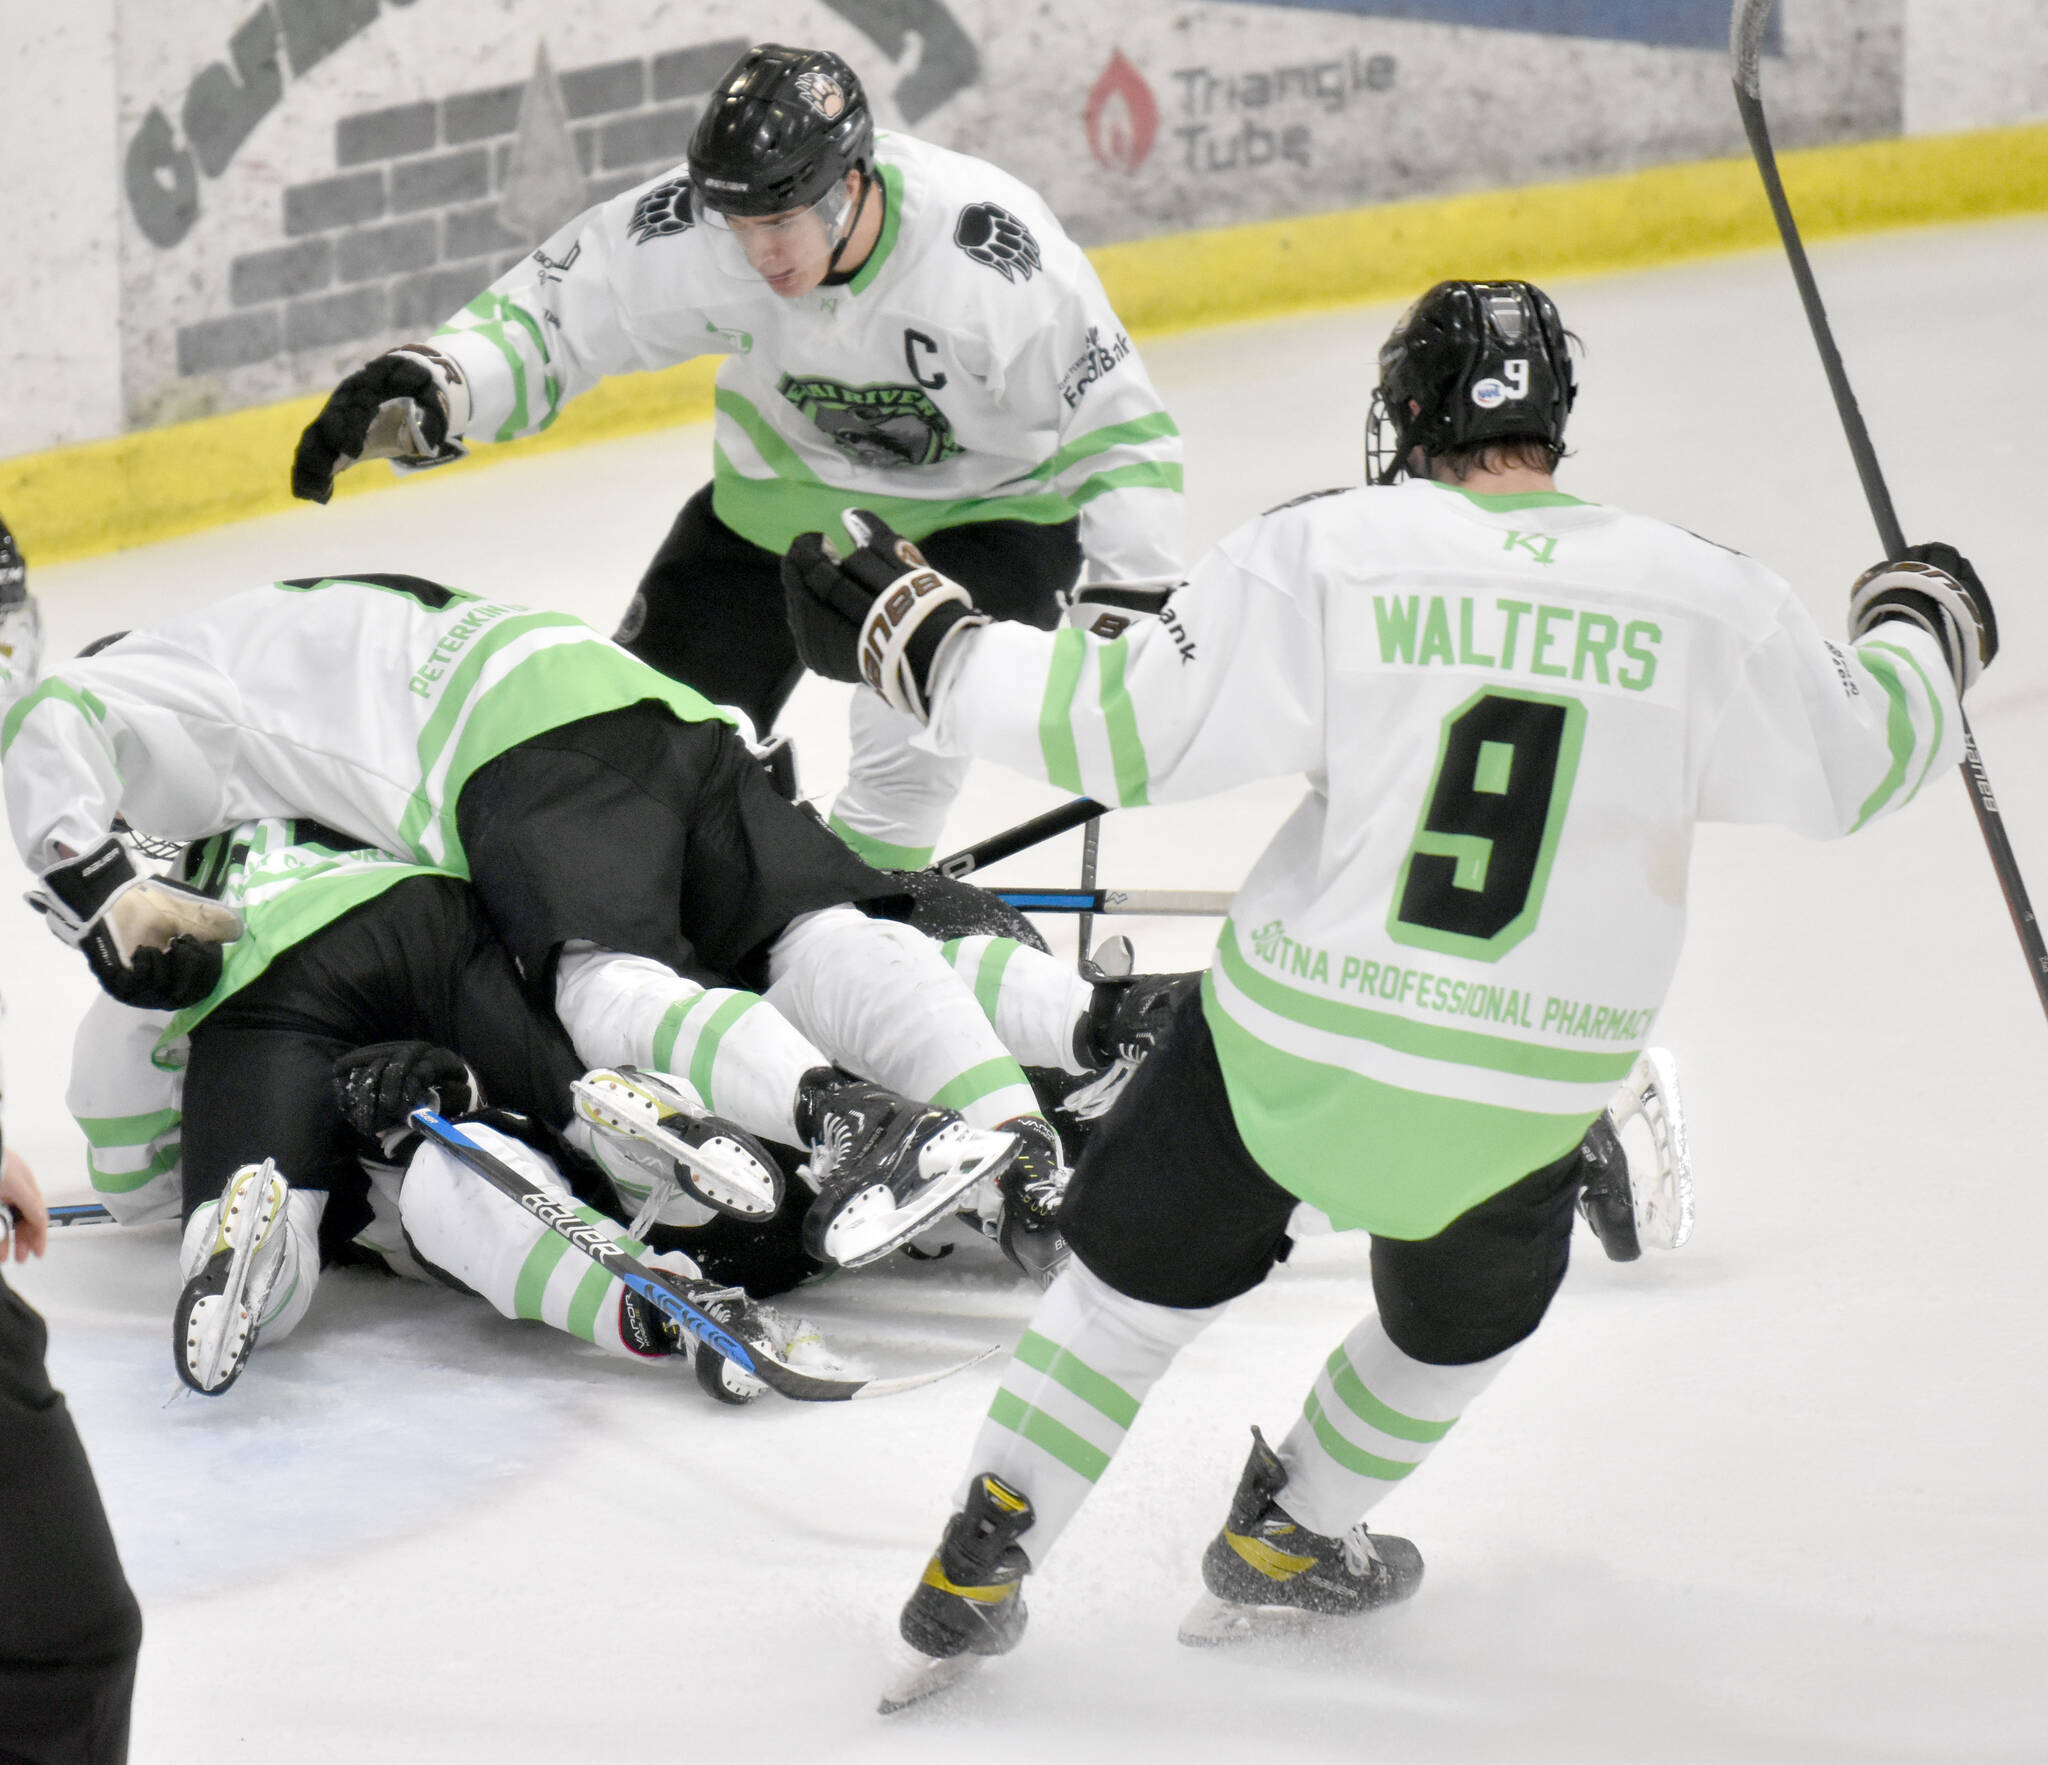 The Kenai River Brown Bears pile on Carson Triggs after he scored the game-winning goal in overtime against the Fairbanks Ice Dogs on Saturday, Feb. 18, 2023, at the Soldotna Regional Sports Complex in Soldotna, Alaska. (Photo by Jeff Helminiak/Peninsula Clarion)